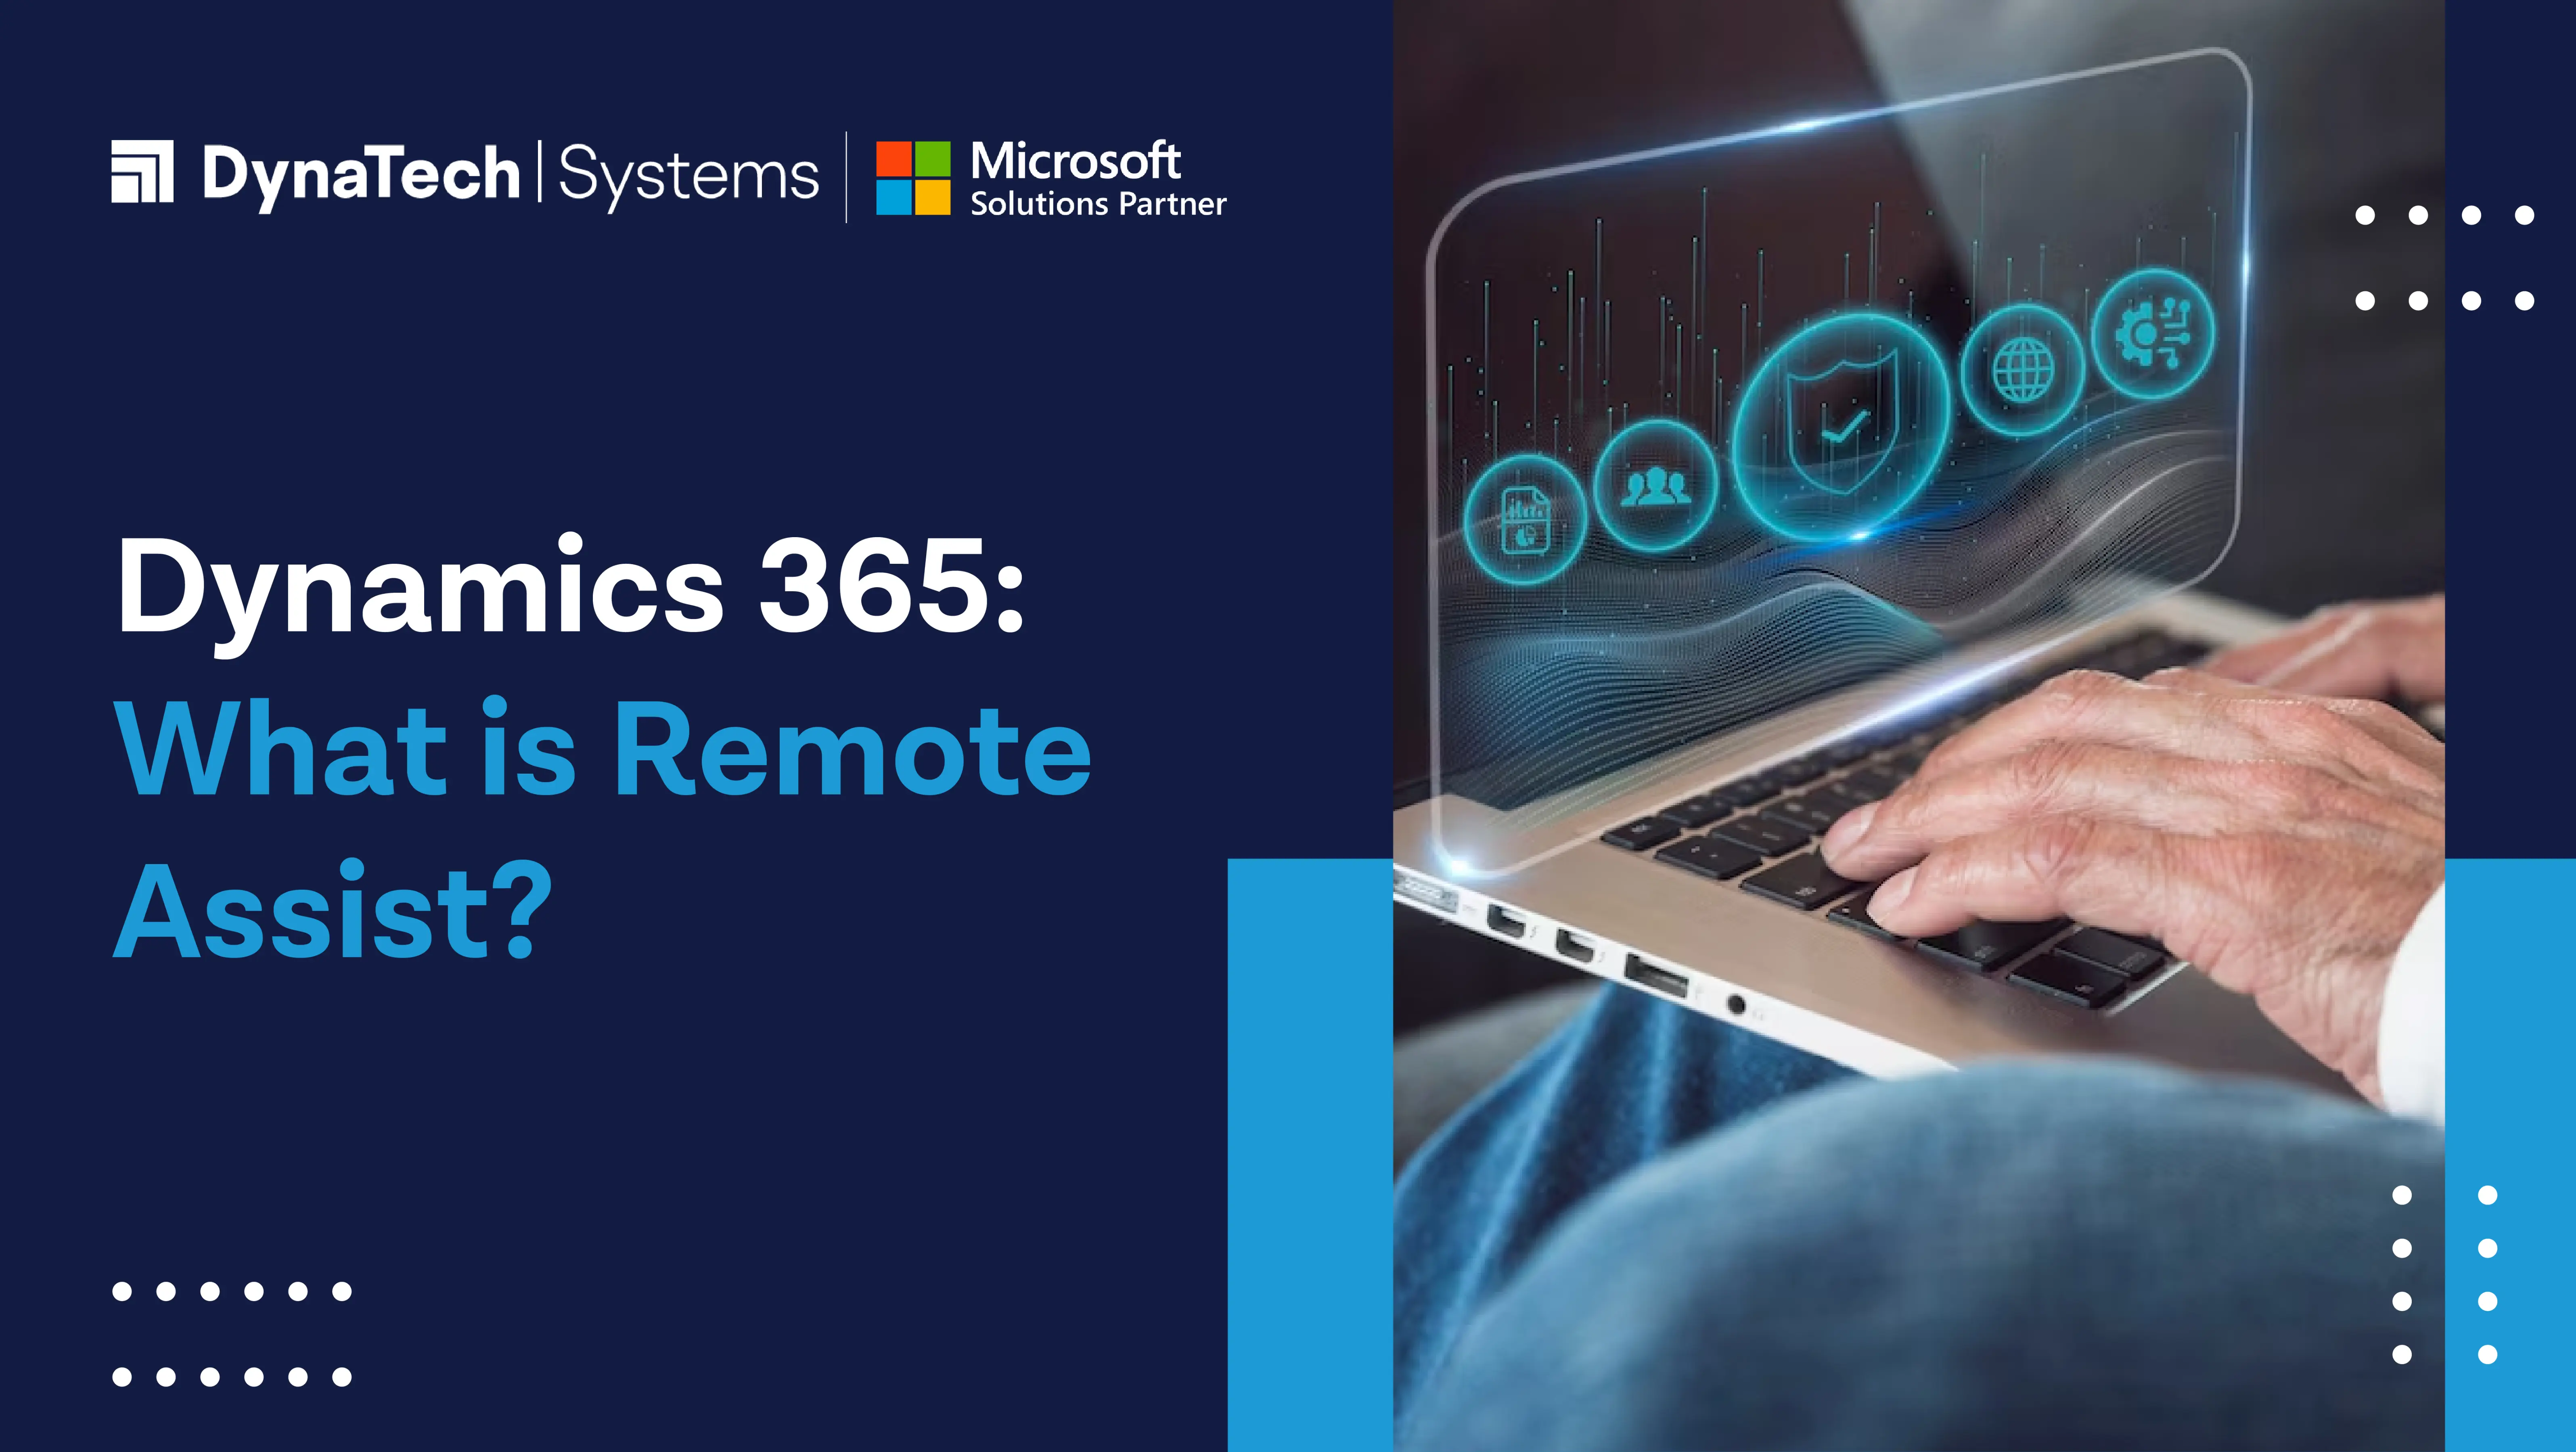 Dynamics 365: What is Remote Assist?